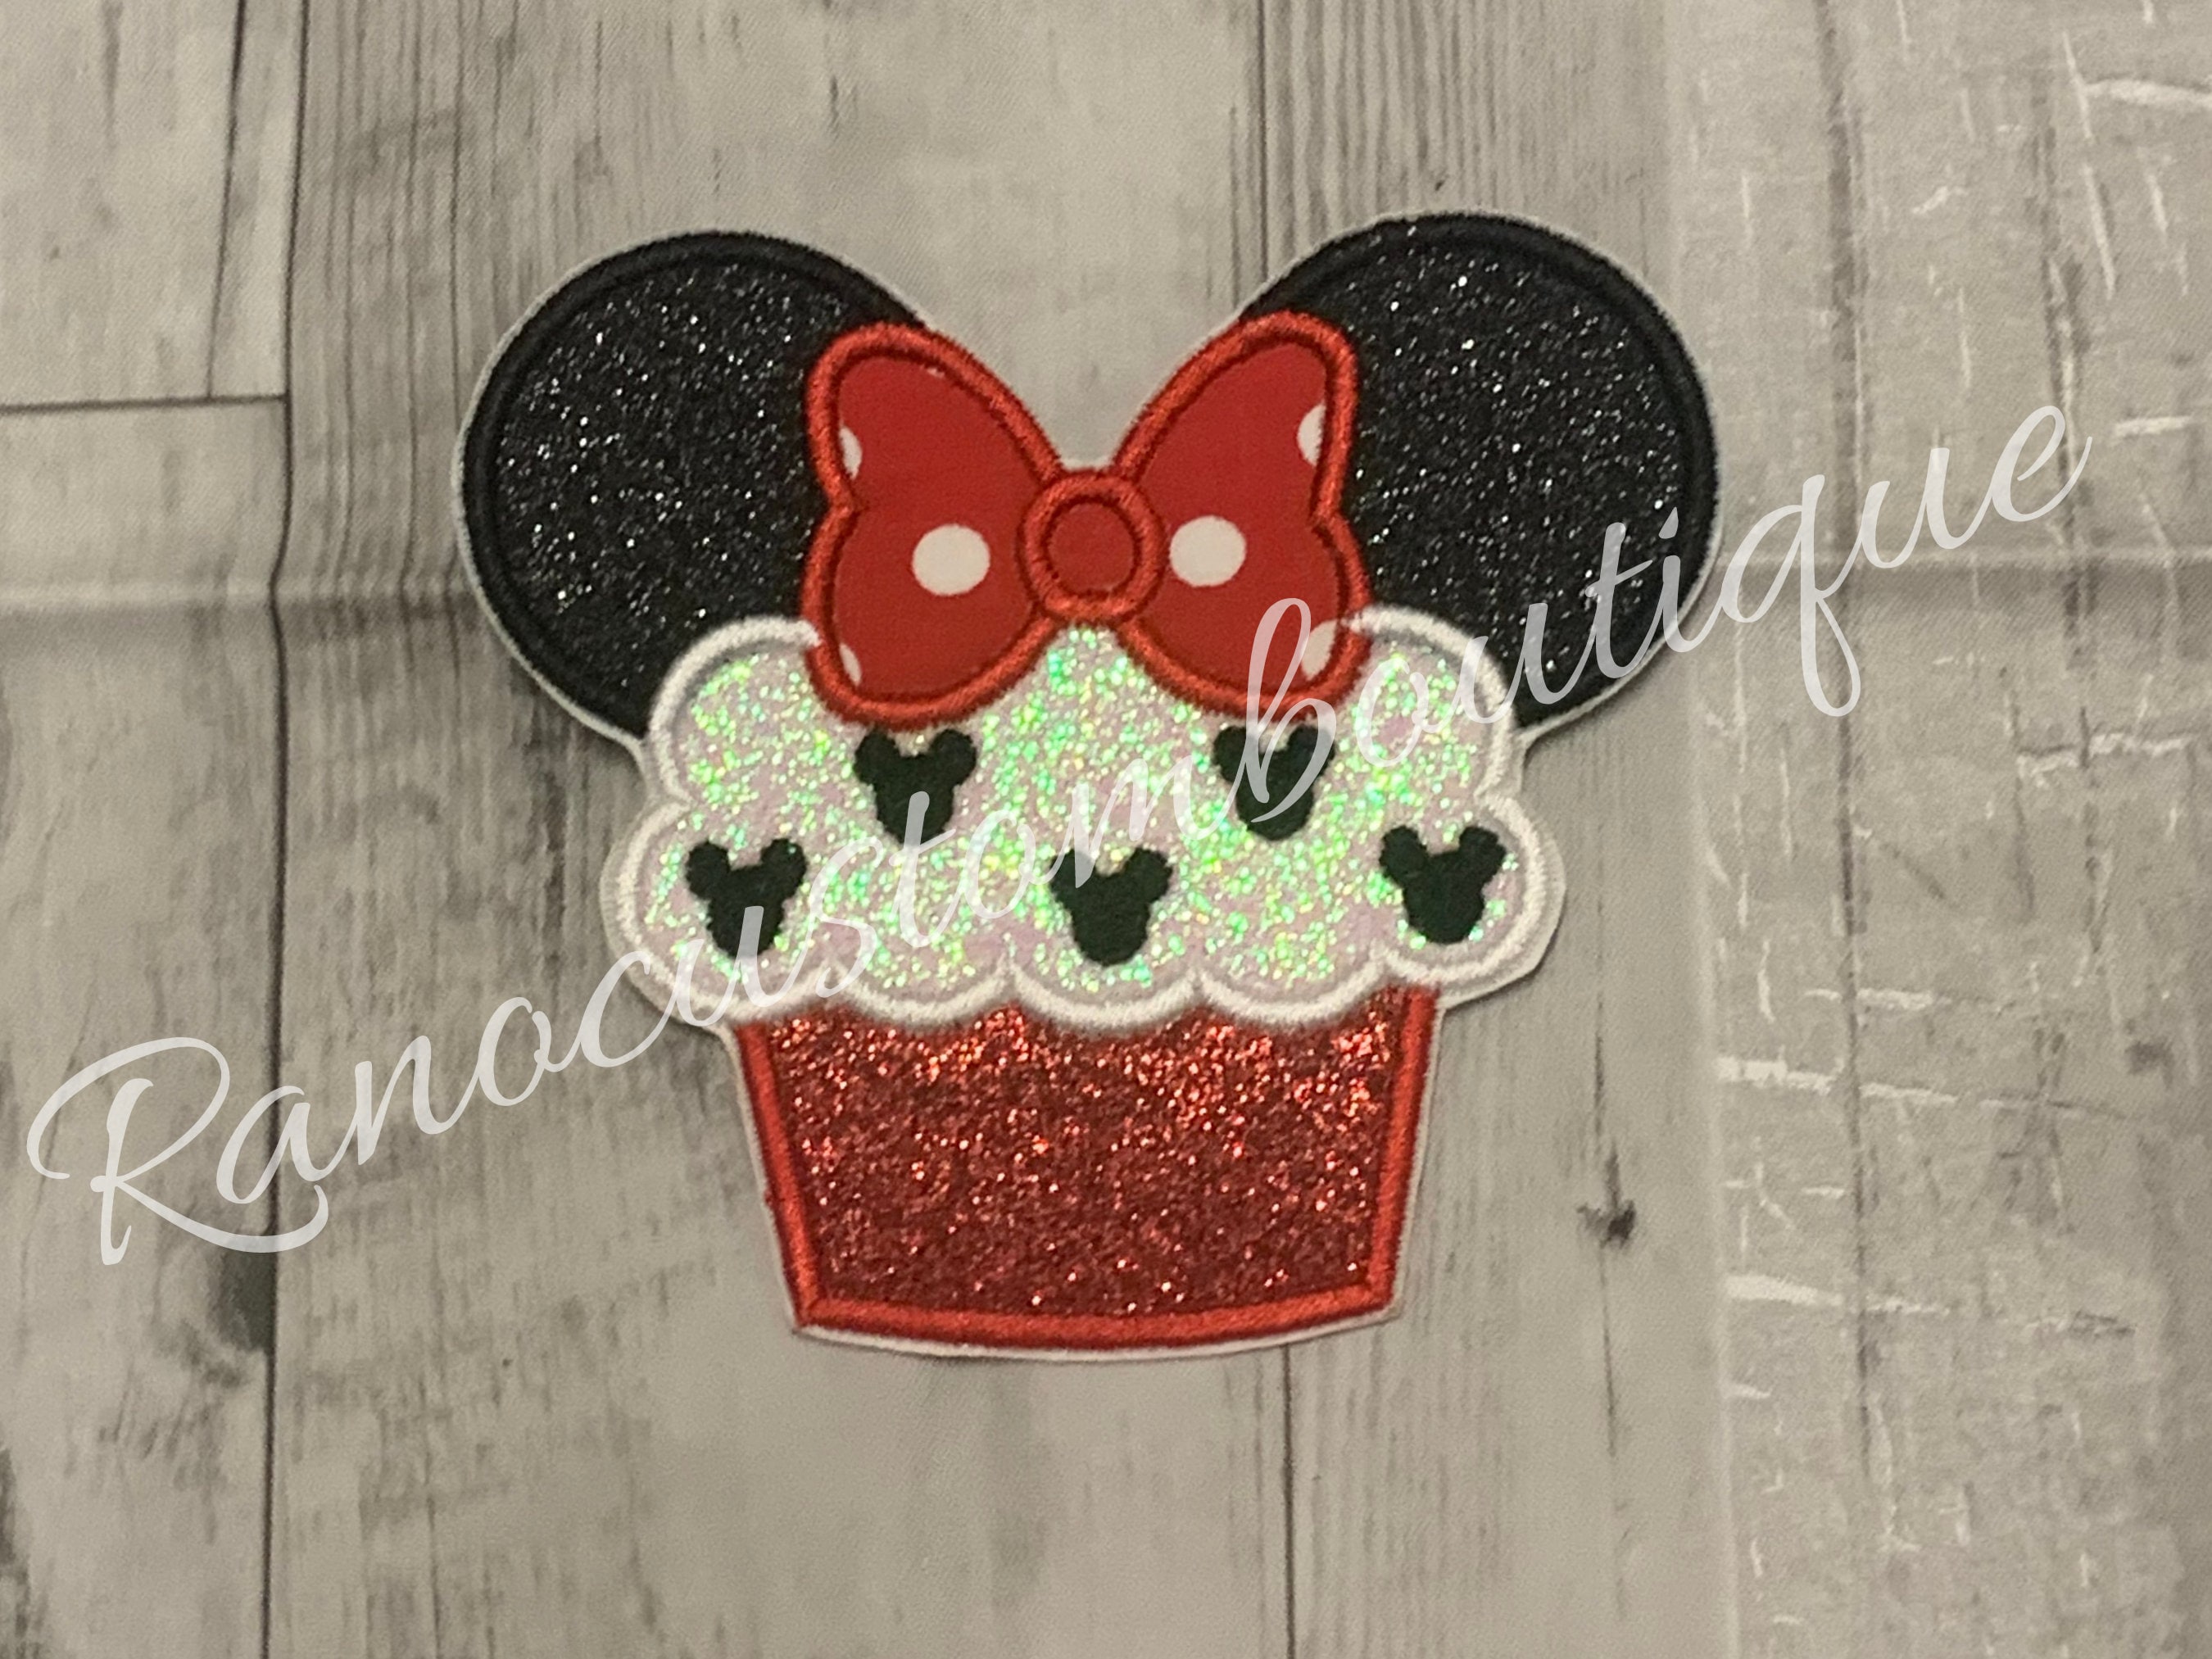 Large Sequin Minnie Mouse Patch, Minnie Bow Patch, Disney Iron on